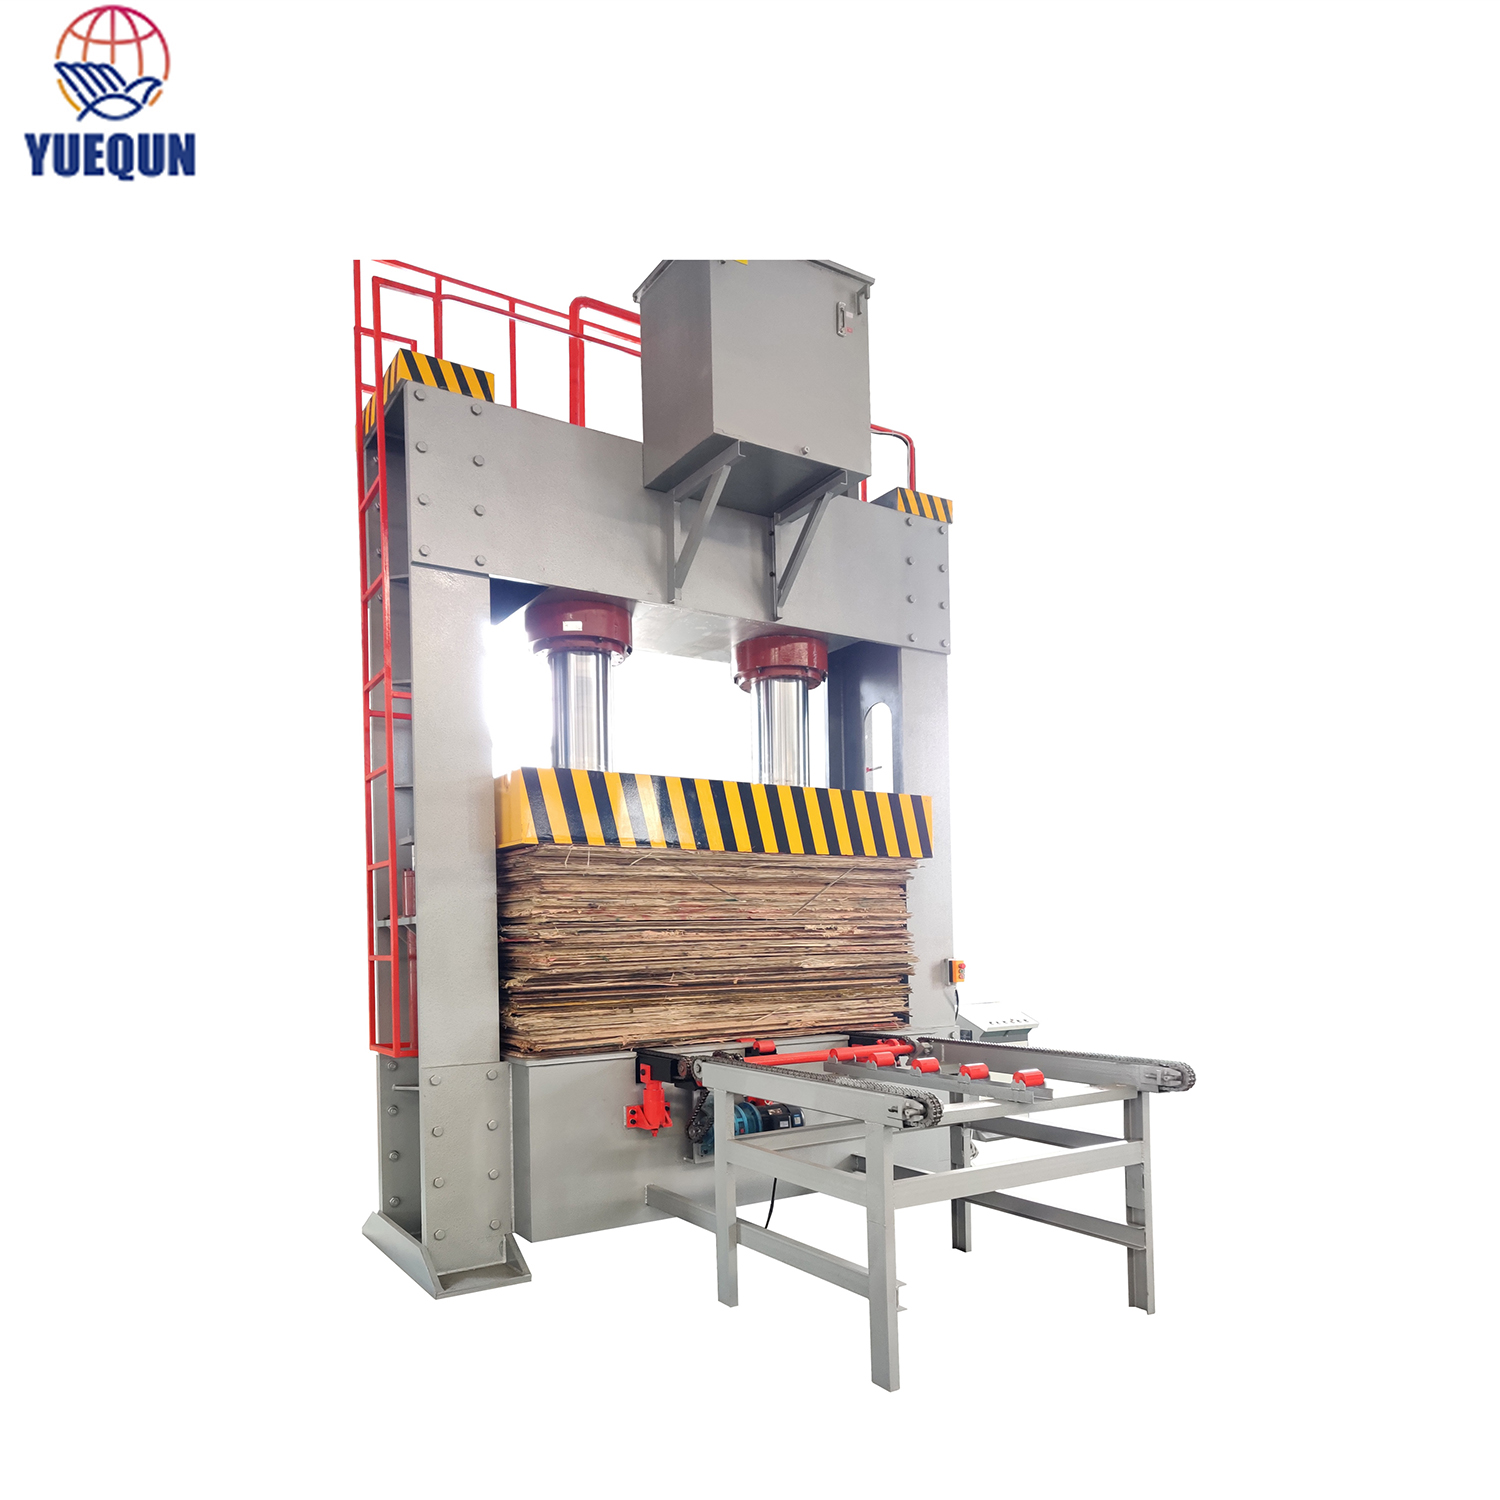 Hydraulic Cold Press machine for wooden door cold press